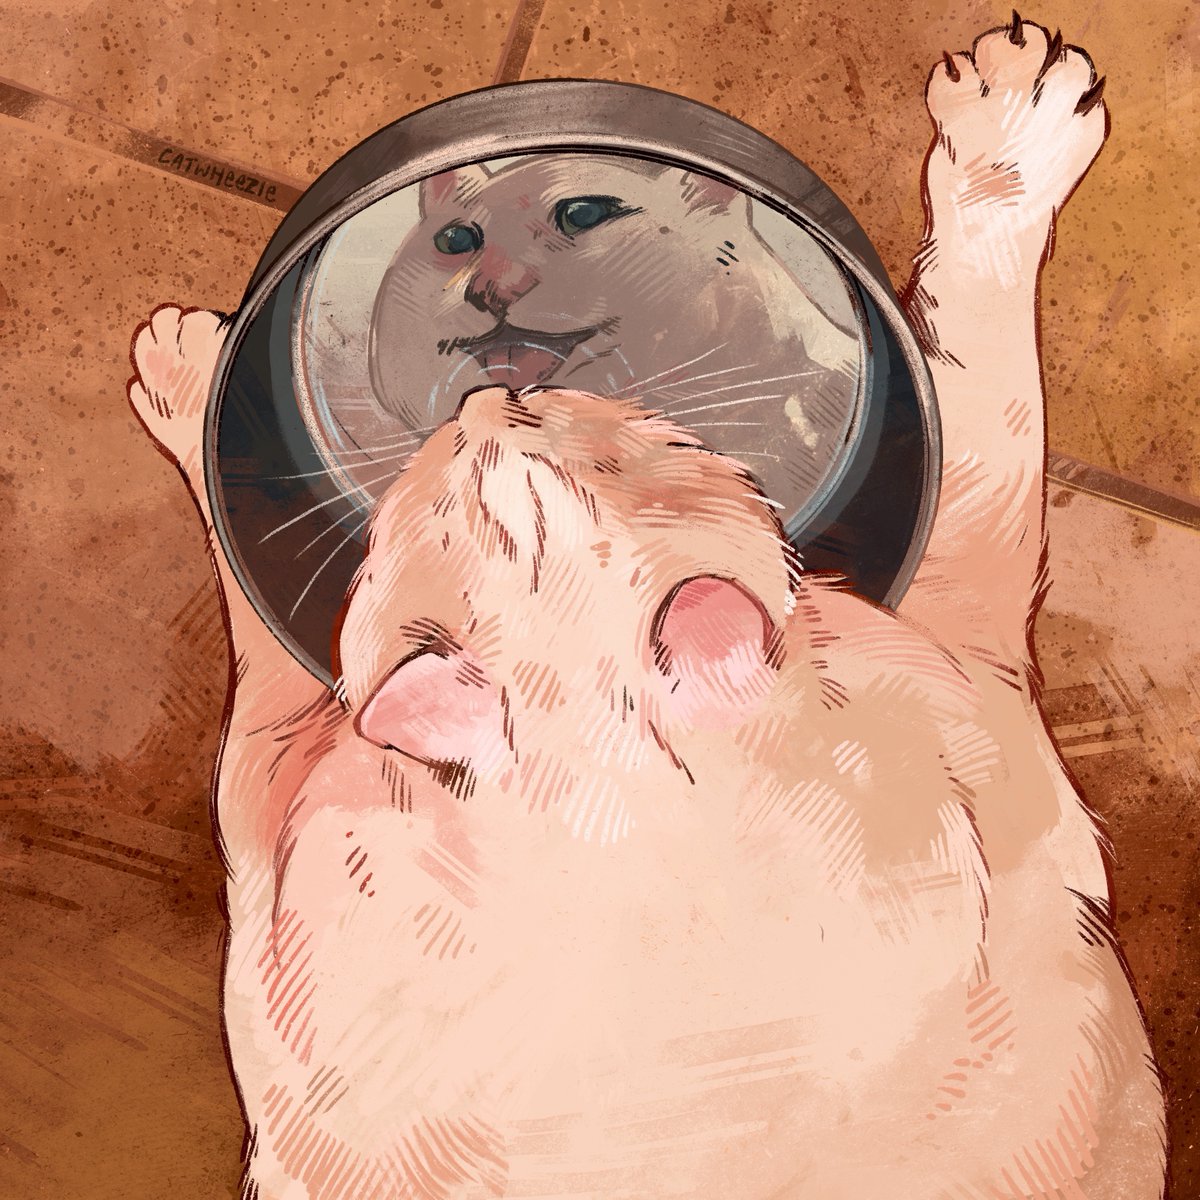 mirror mirror in the bowl, who's the fattest chunky boi?